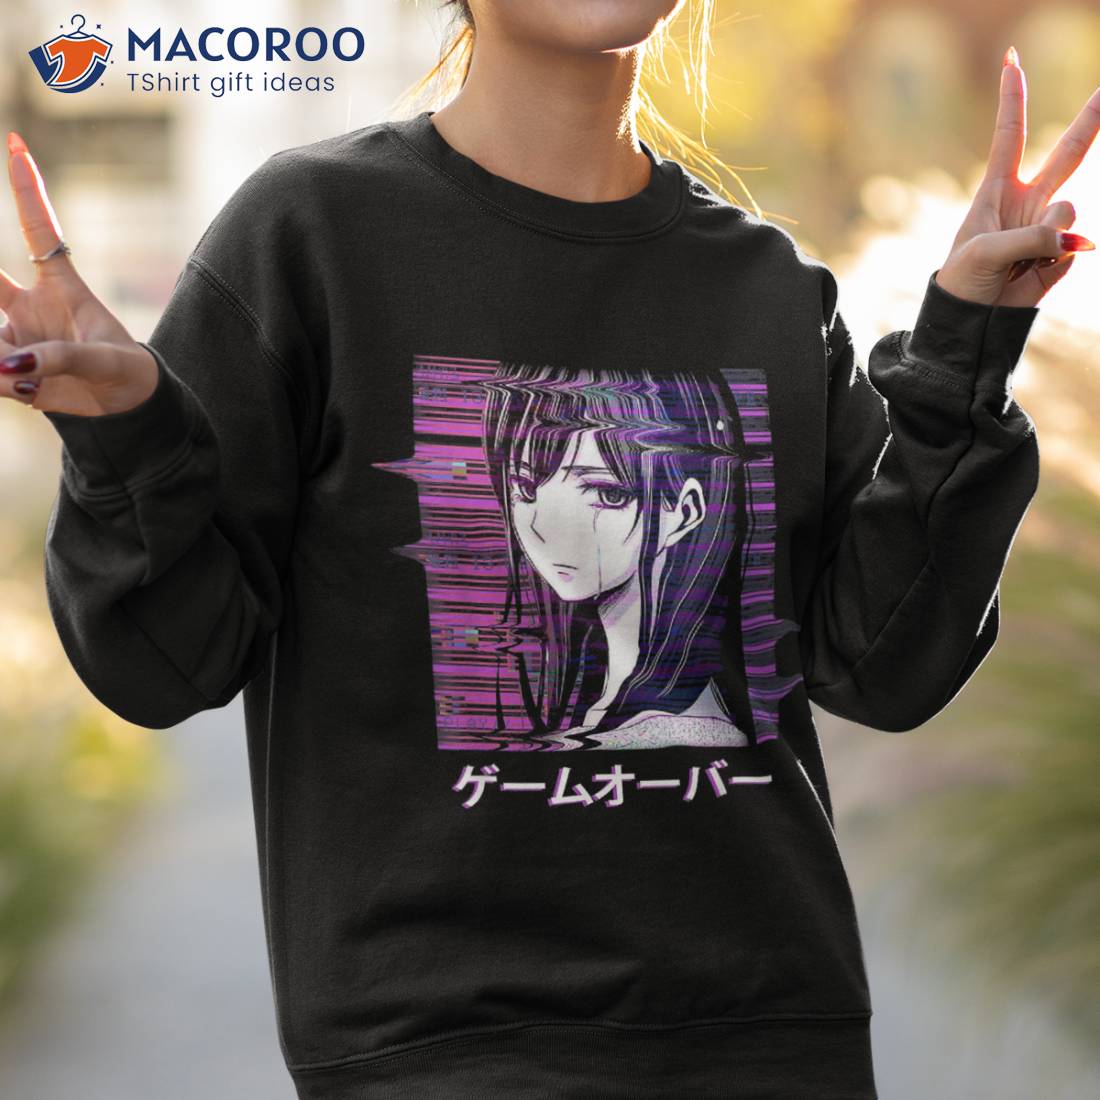 Buy Anime Shirt Online In India  Etsy India